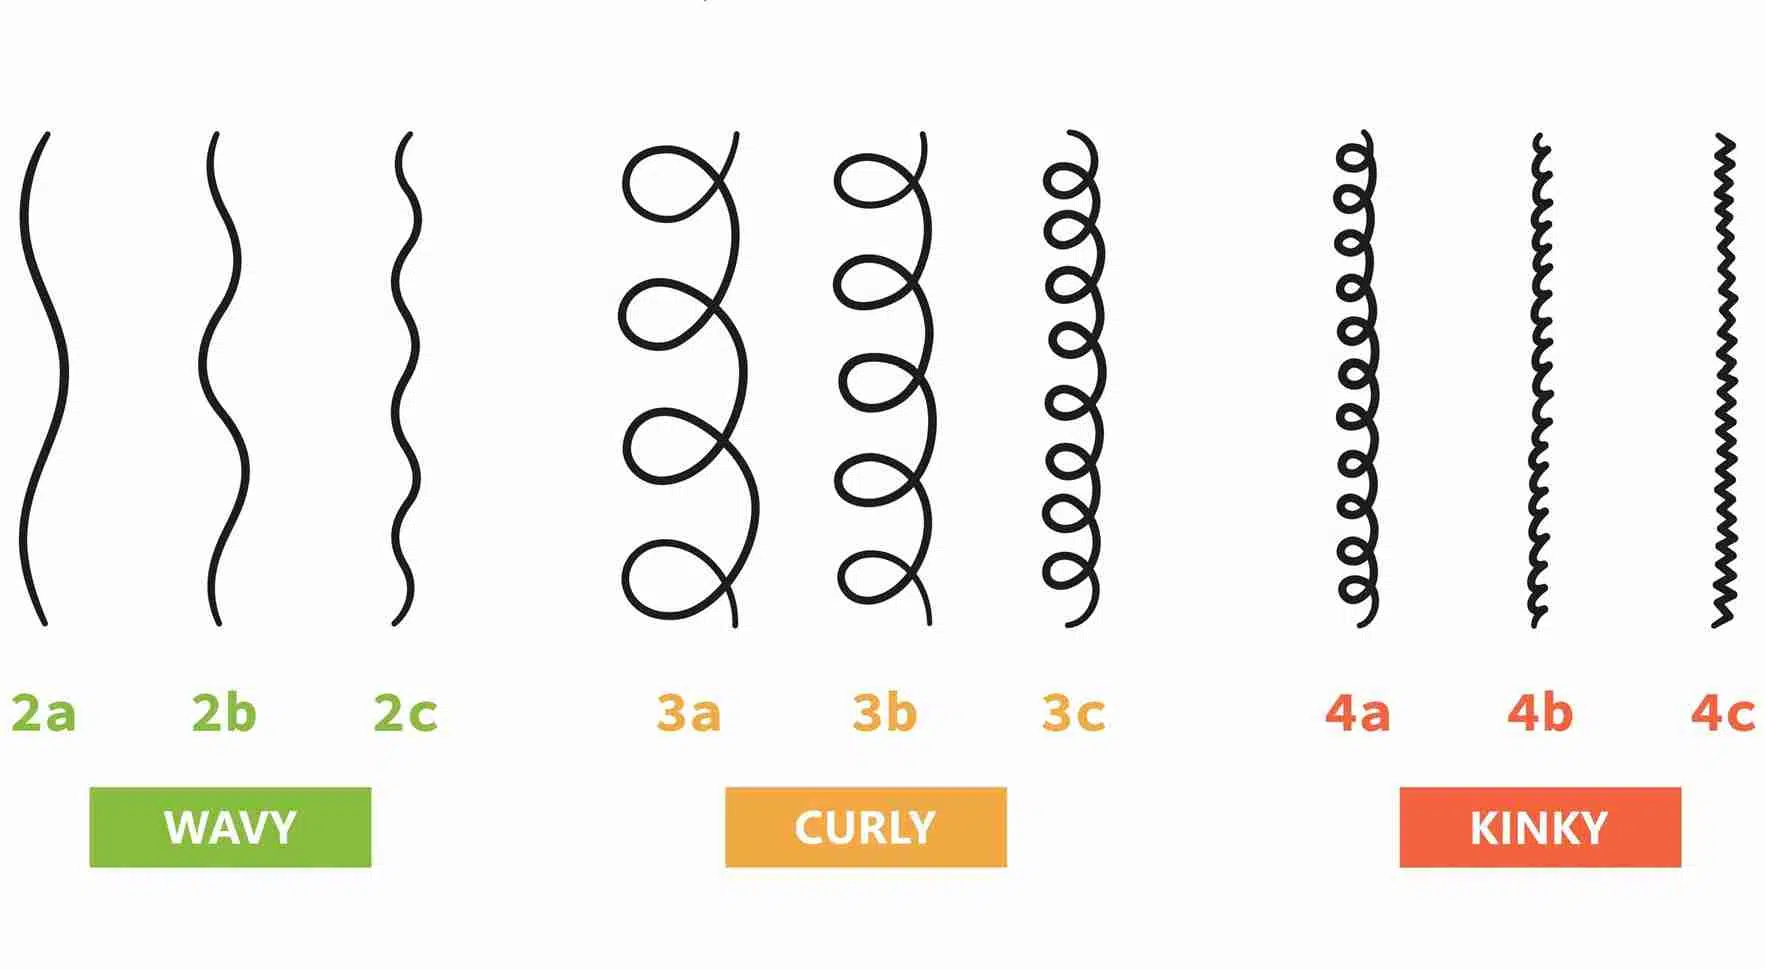 Curly hair types